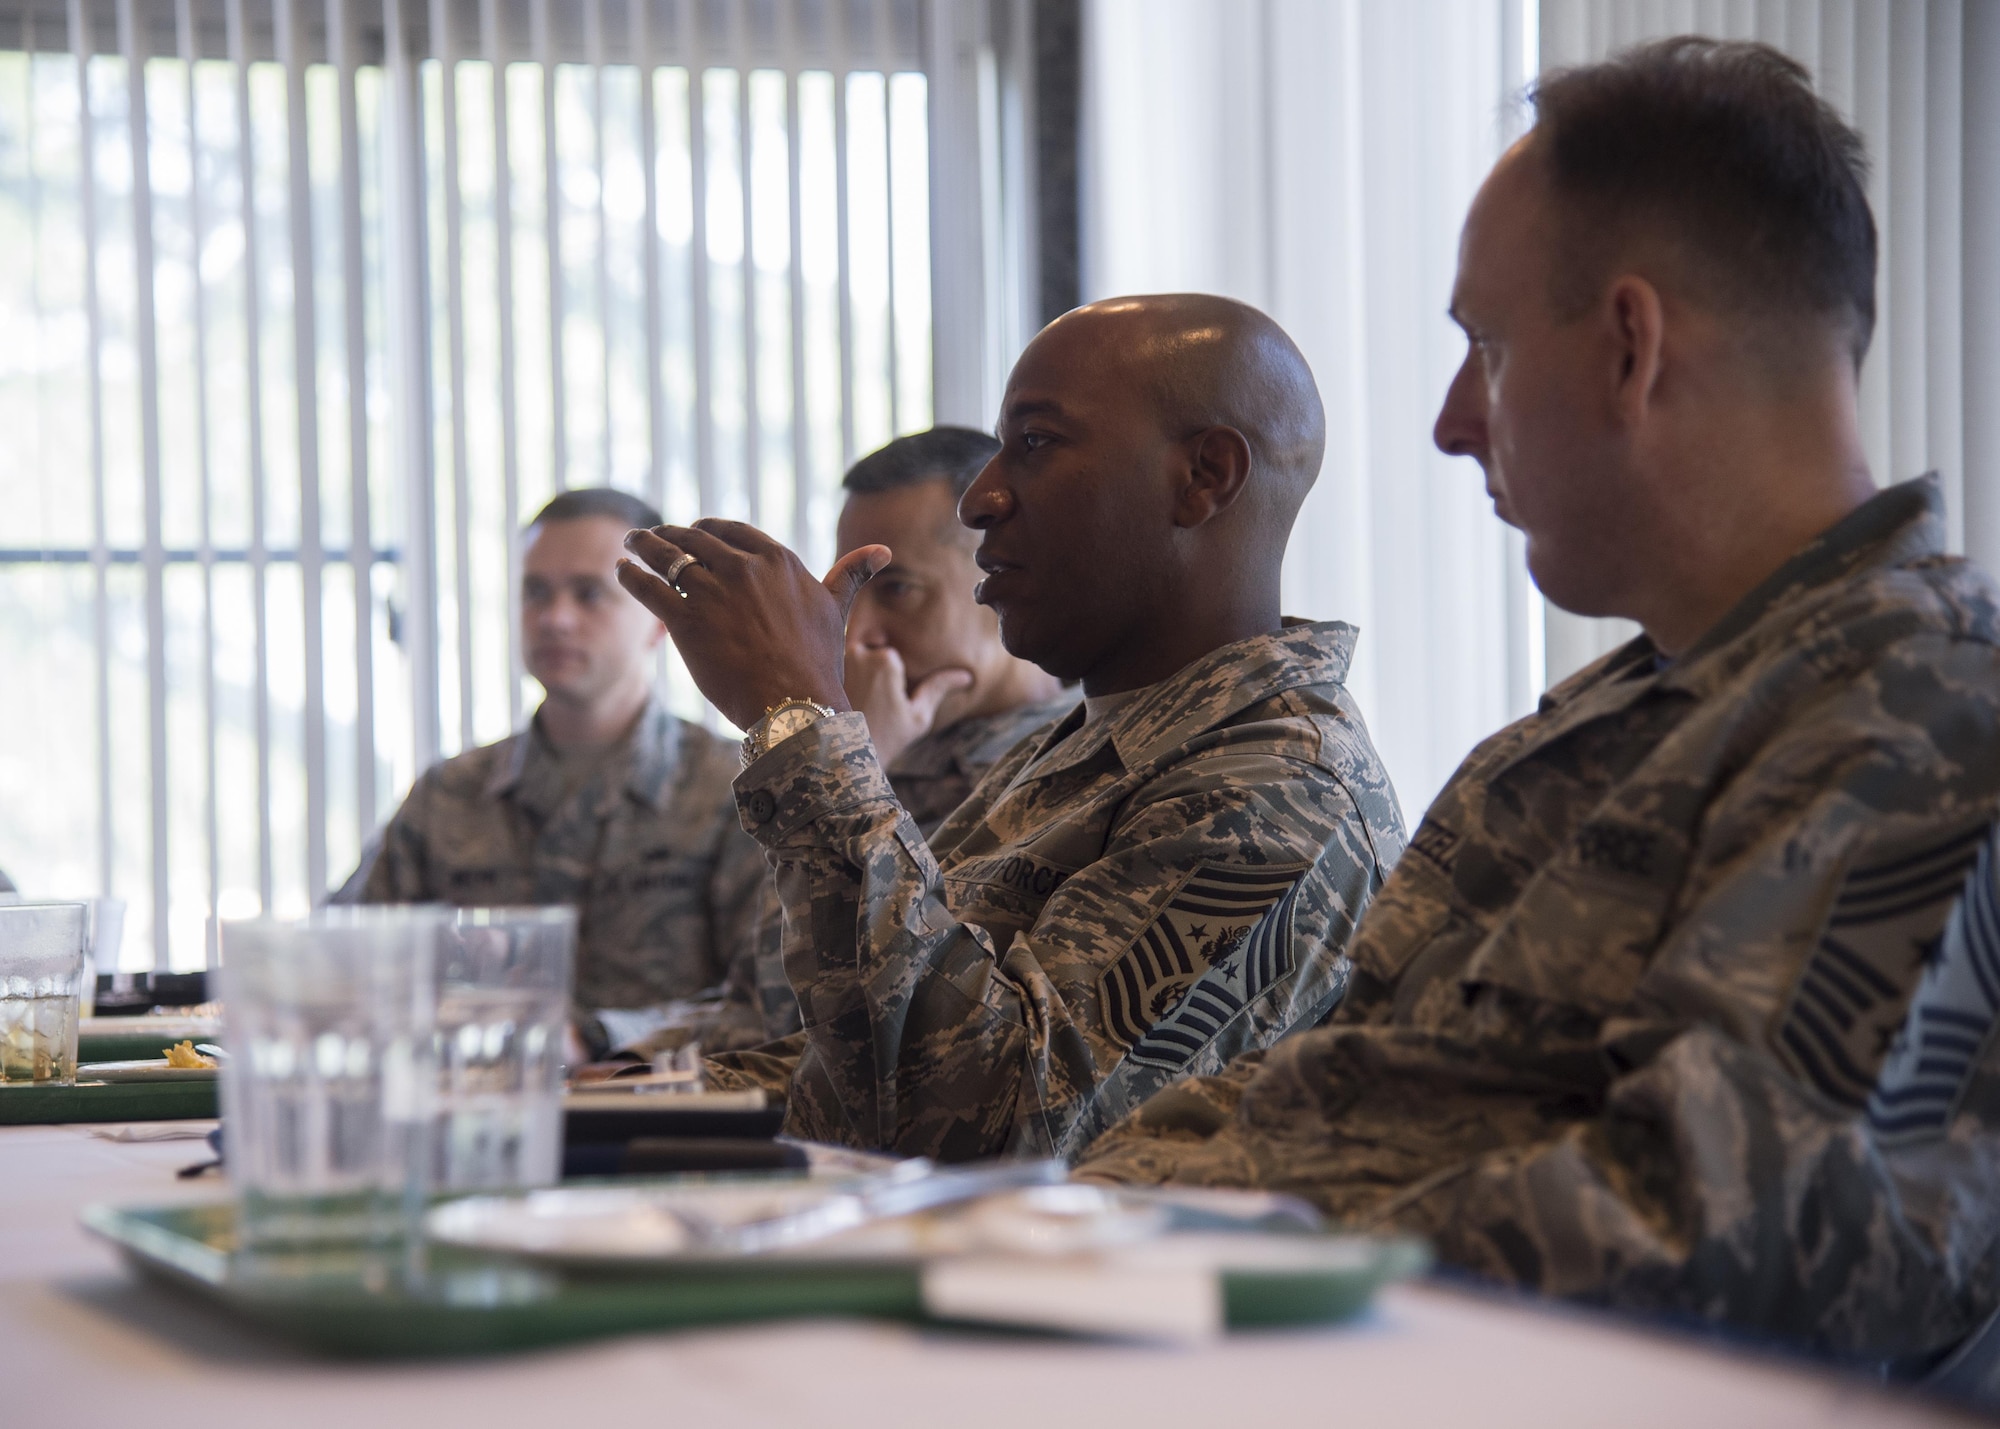 Chief Master Sgt. of the Air Force Kaleth O. Wright addresses Airmen’s concerns during his Indo-Asia Pacific immersion tour at Misawa Air Base, Japan, June 9, 2017. Wright explained how the 35th Fighter Wing Airmen are the definition of resilient warfighter’s, ready to “fight tonight” during an all-call hosted toward the conclusion of his visit. (U.S. Air Force photo by Senior Airman Deana Heitzman)